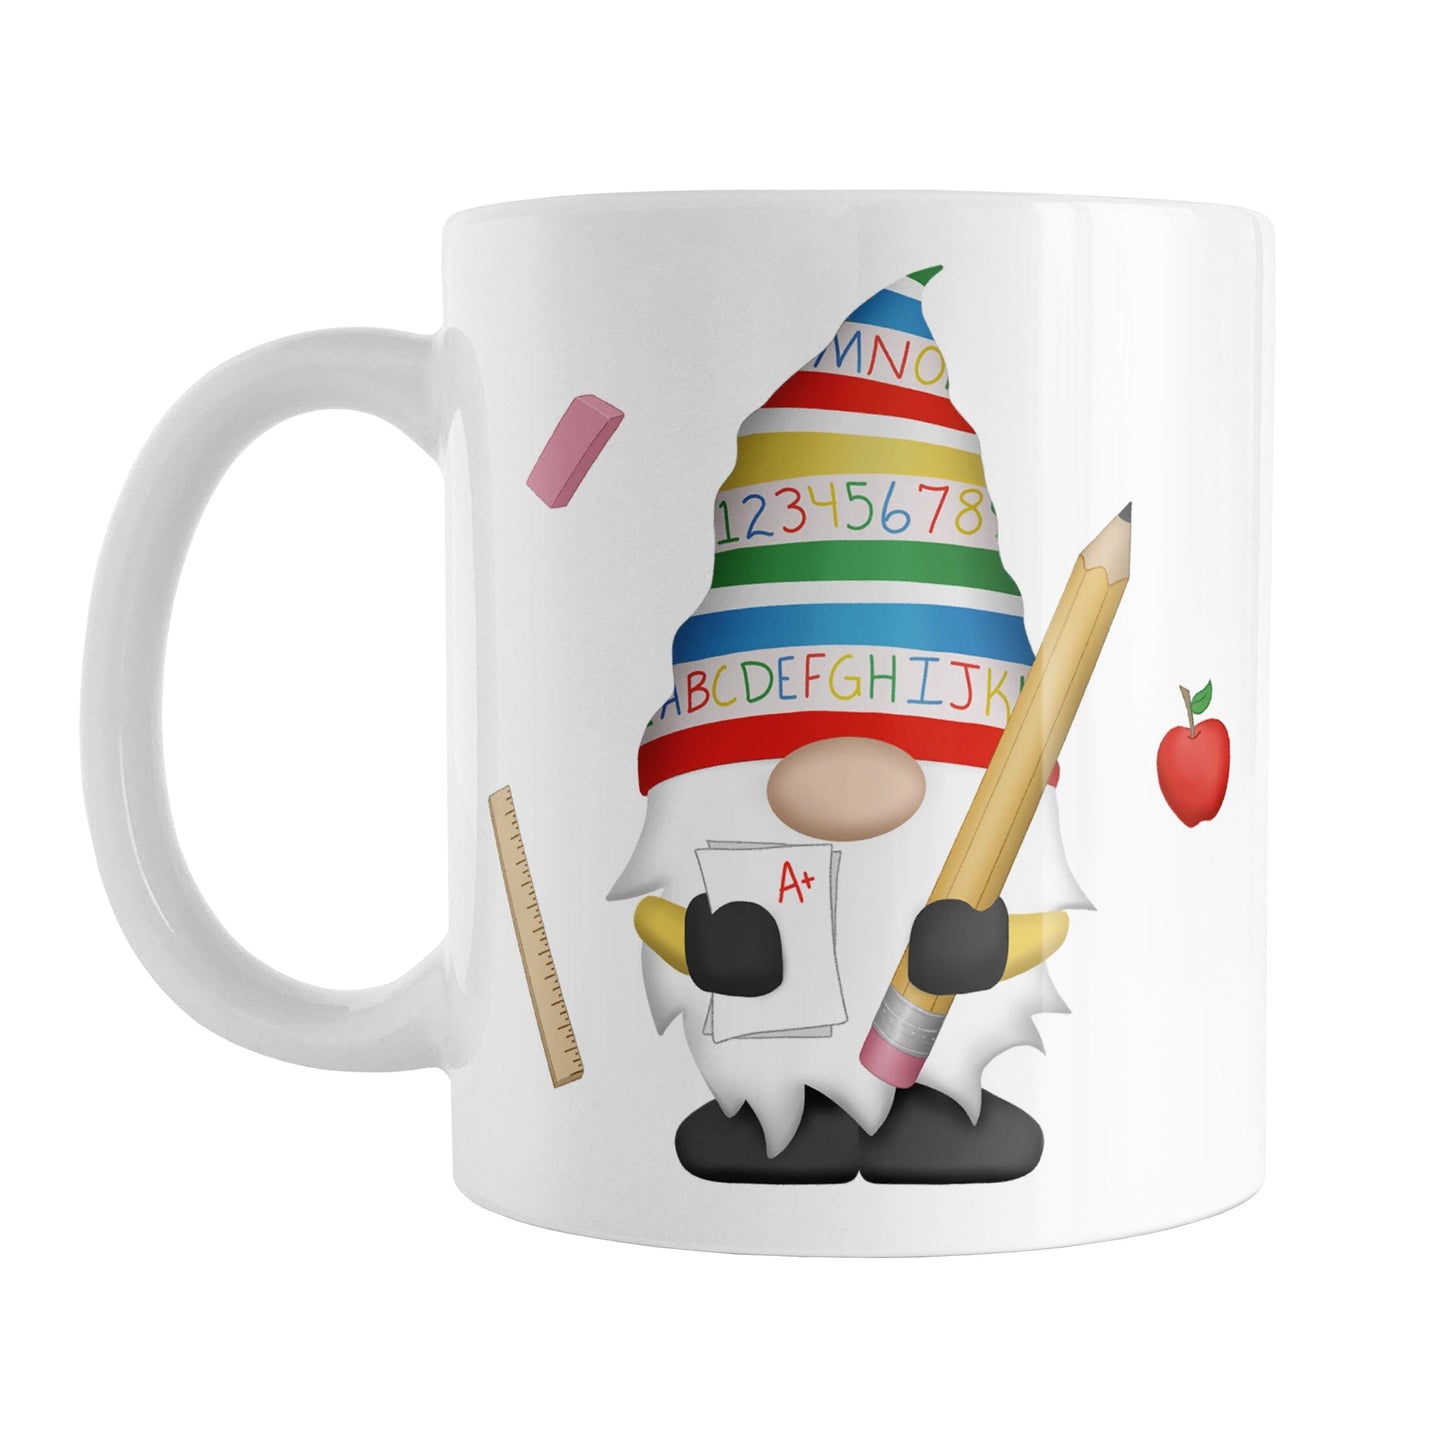 School Teacher Gnome Mug (11oz) at Amy's Coffee Mugs. A ceramic coffee mug designed with an illustration of an adorable gnome wearing a festive hat with numbers and letters in primary colors and holding a large oversized pencil and graded A+ paper. Around the gnome is an eraser, a ruler, and a red apple.